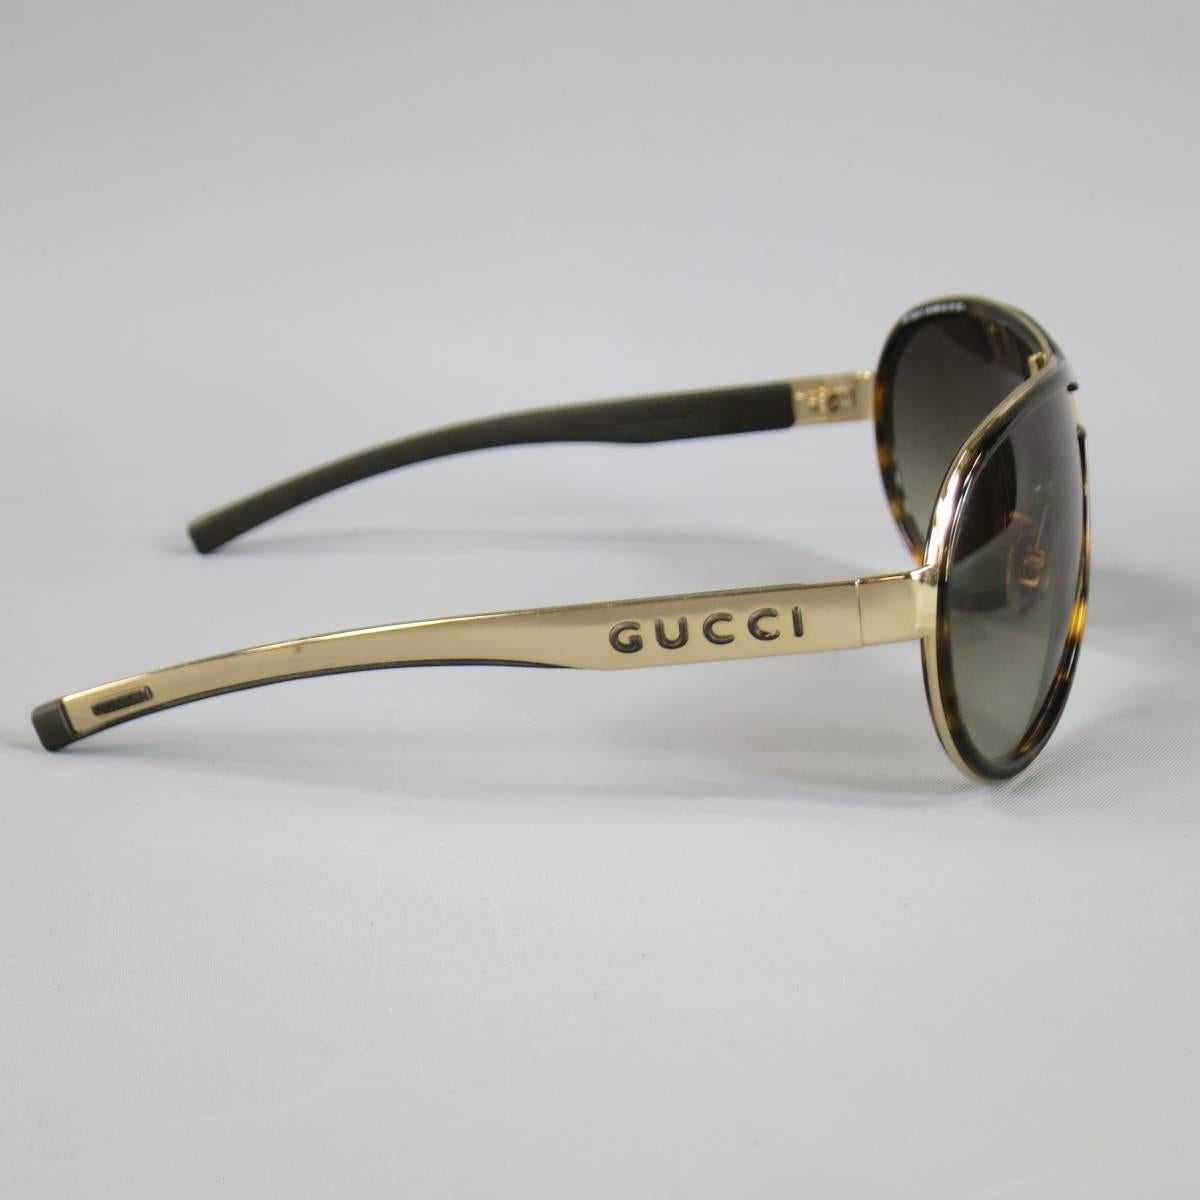 GUCCI Sunglasses consists of acetate and metal material in a tortoiseshell color tone. Designed in a sleek aviator frame, solid gold temples with 